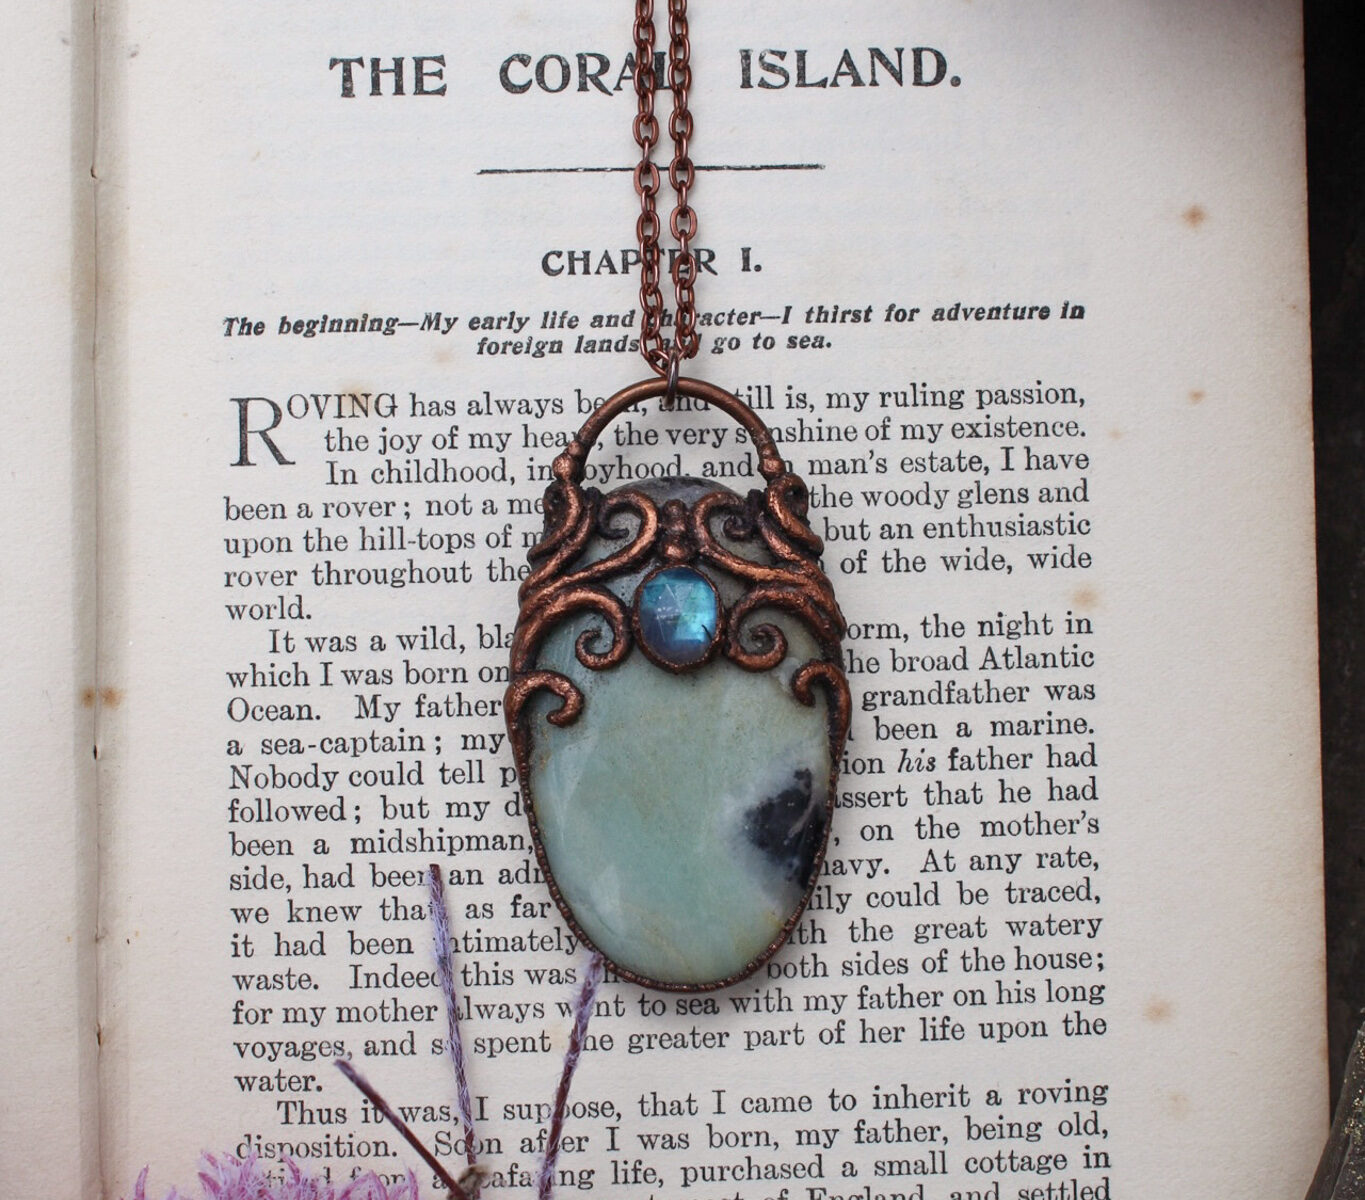 Amazonite and Blue Faceted Labradorite Mermaid Portal Necklace